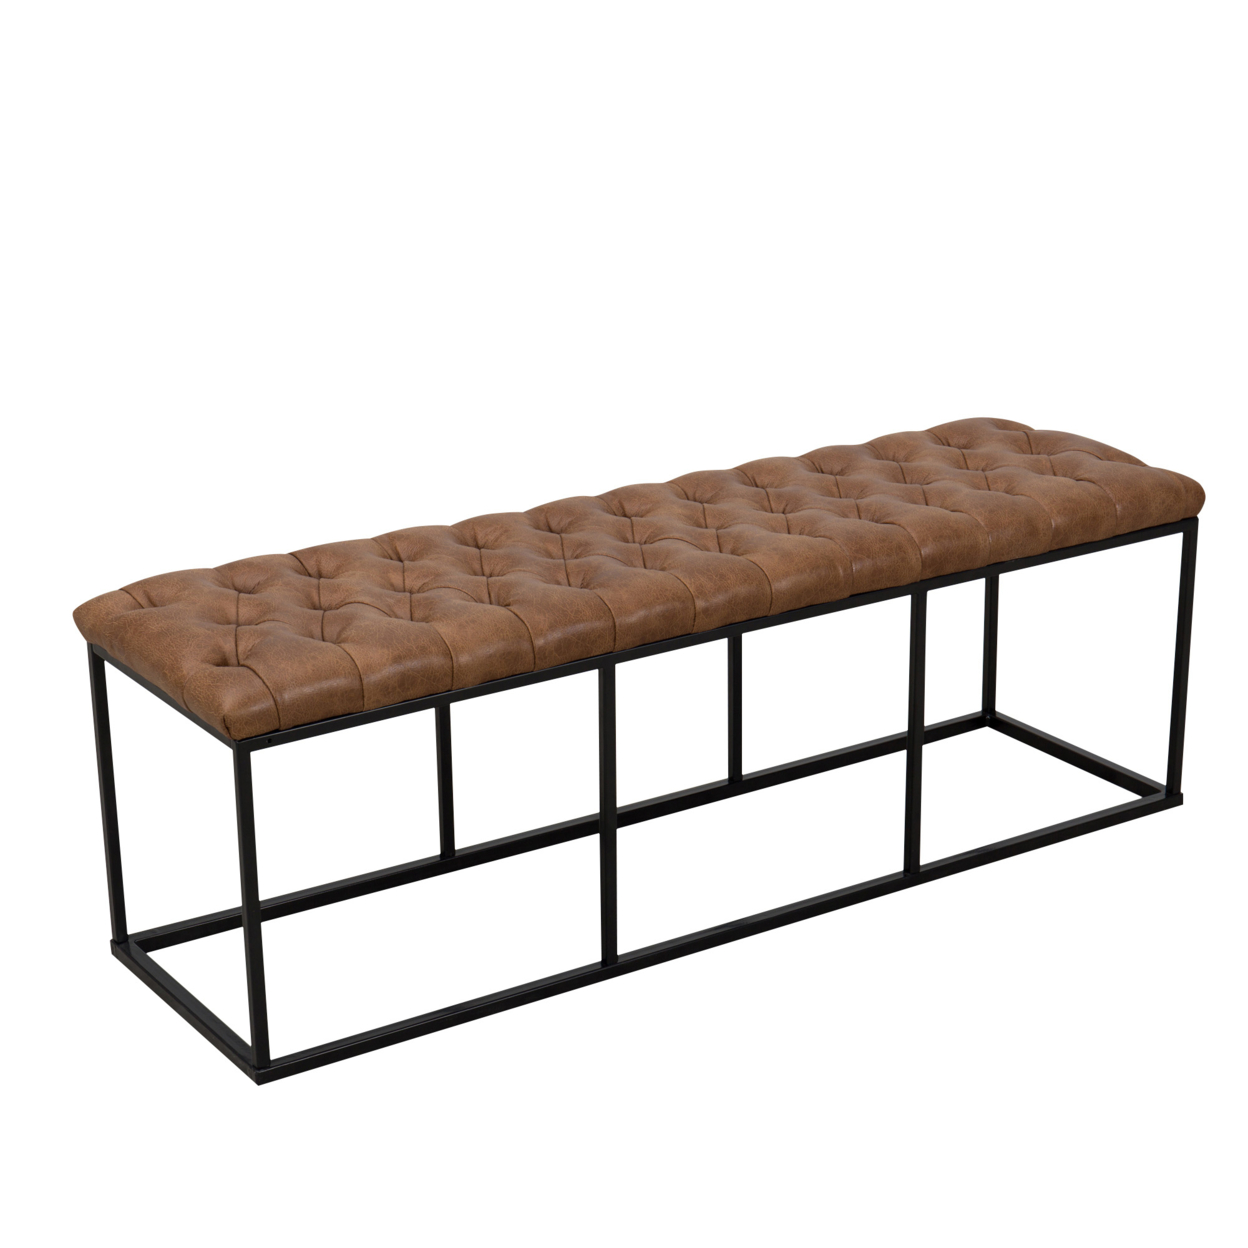 Leatherette Upholstered Bench With Button Tufted Cushioned Seat And Metal Base, Brown- Saltoro Sherpi